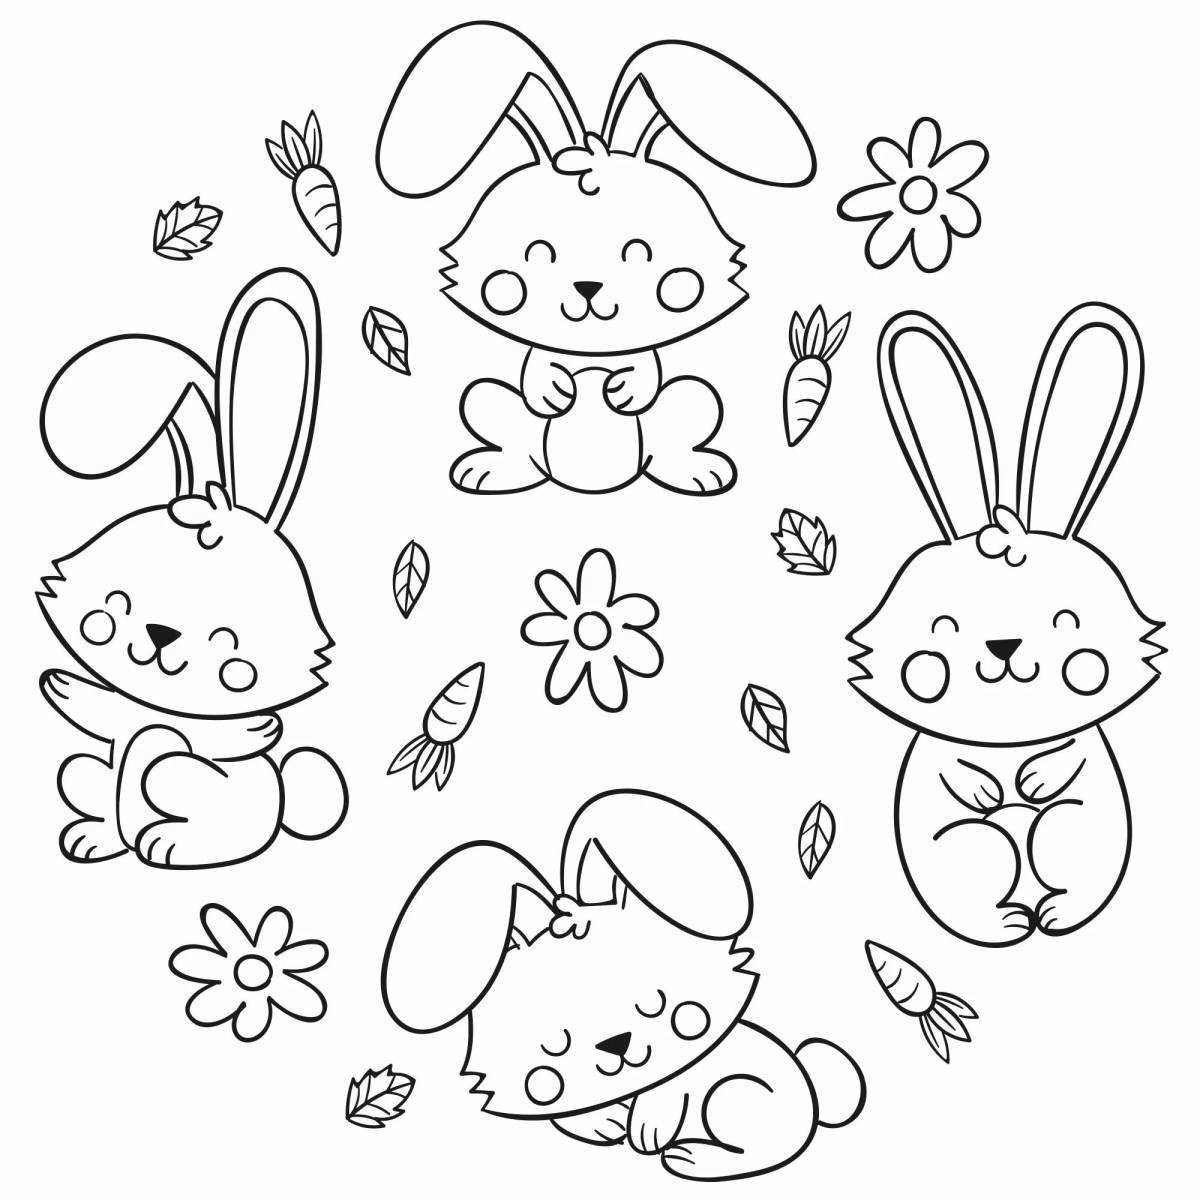 Snuggly rabbit coloring page